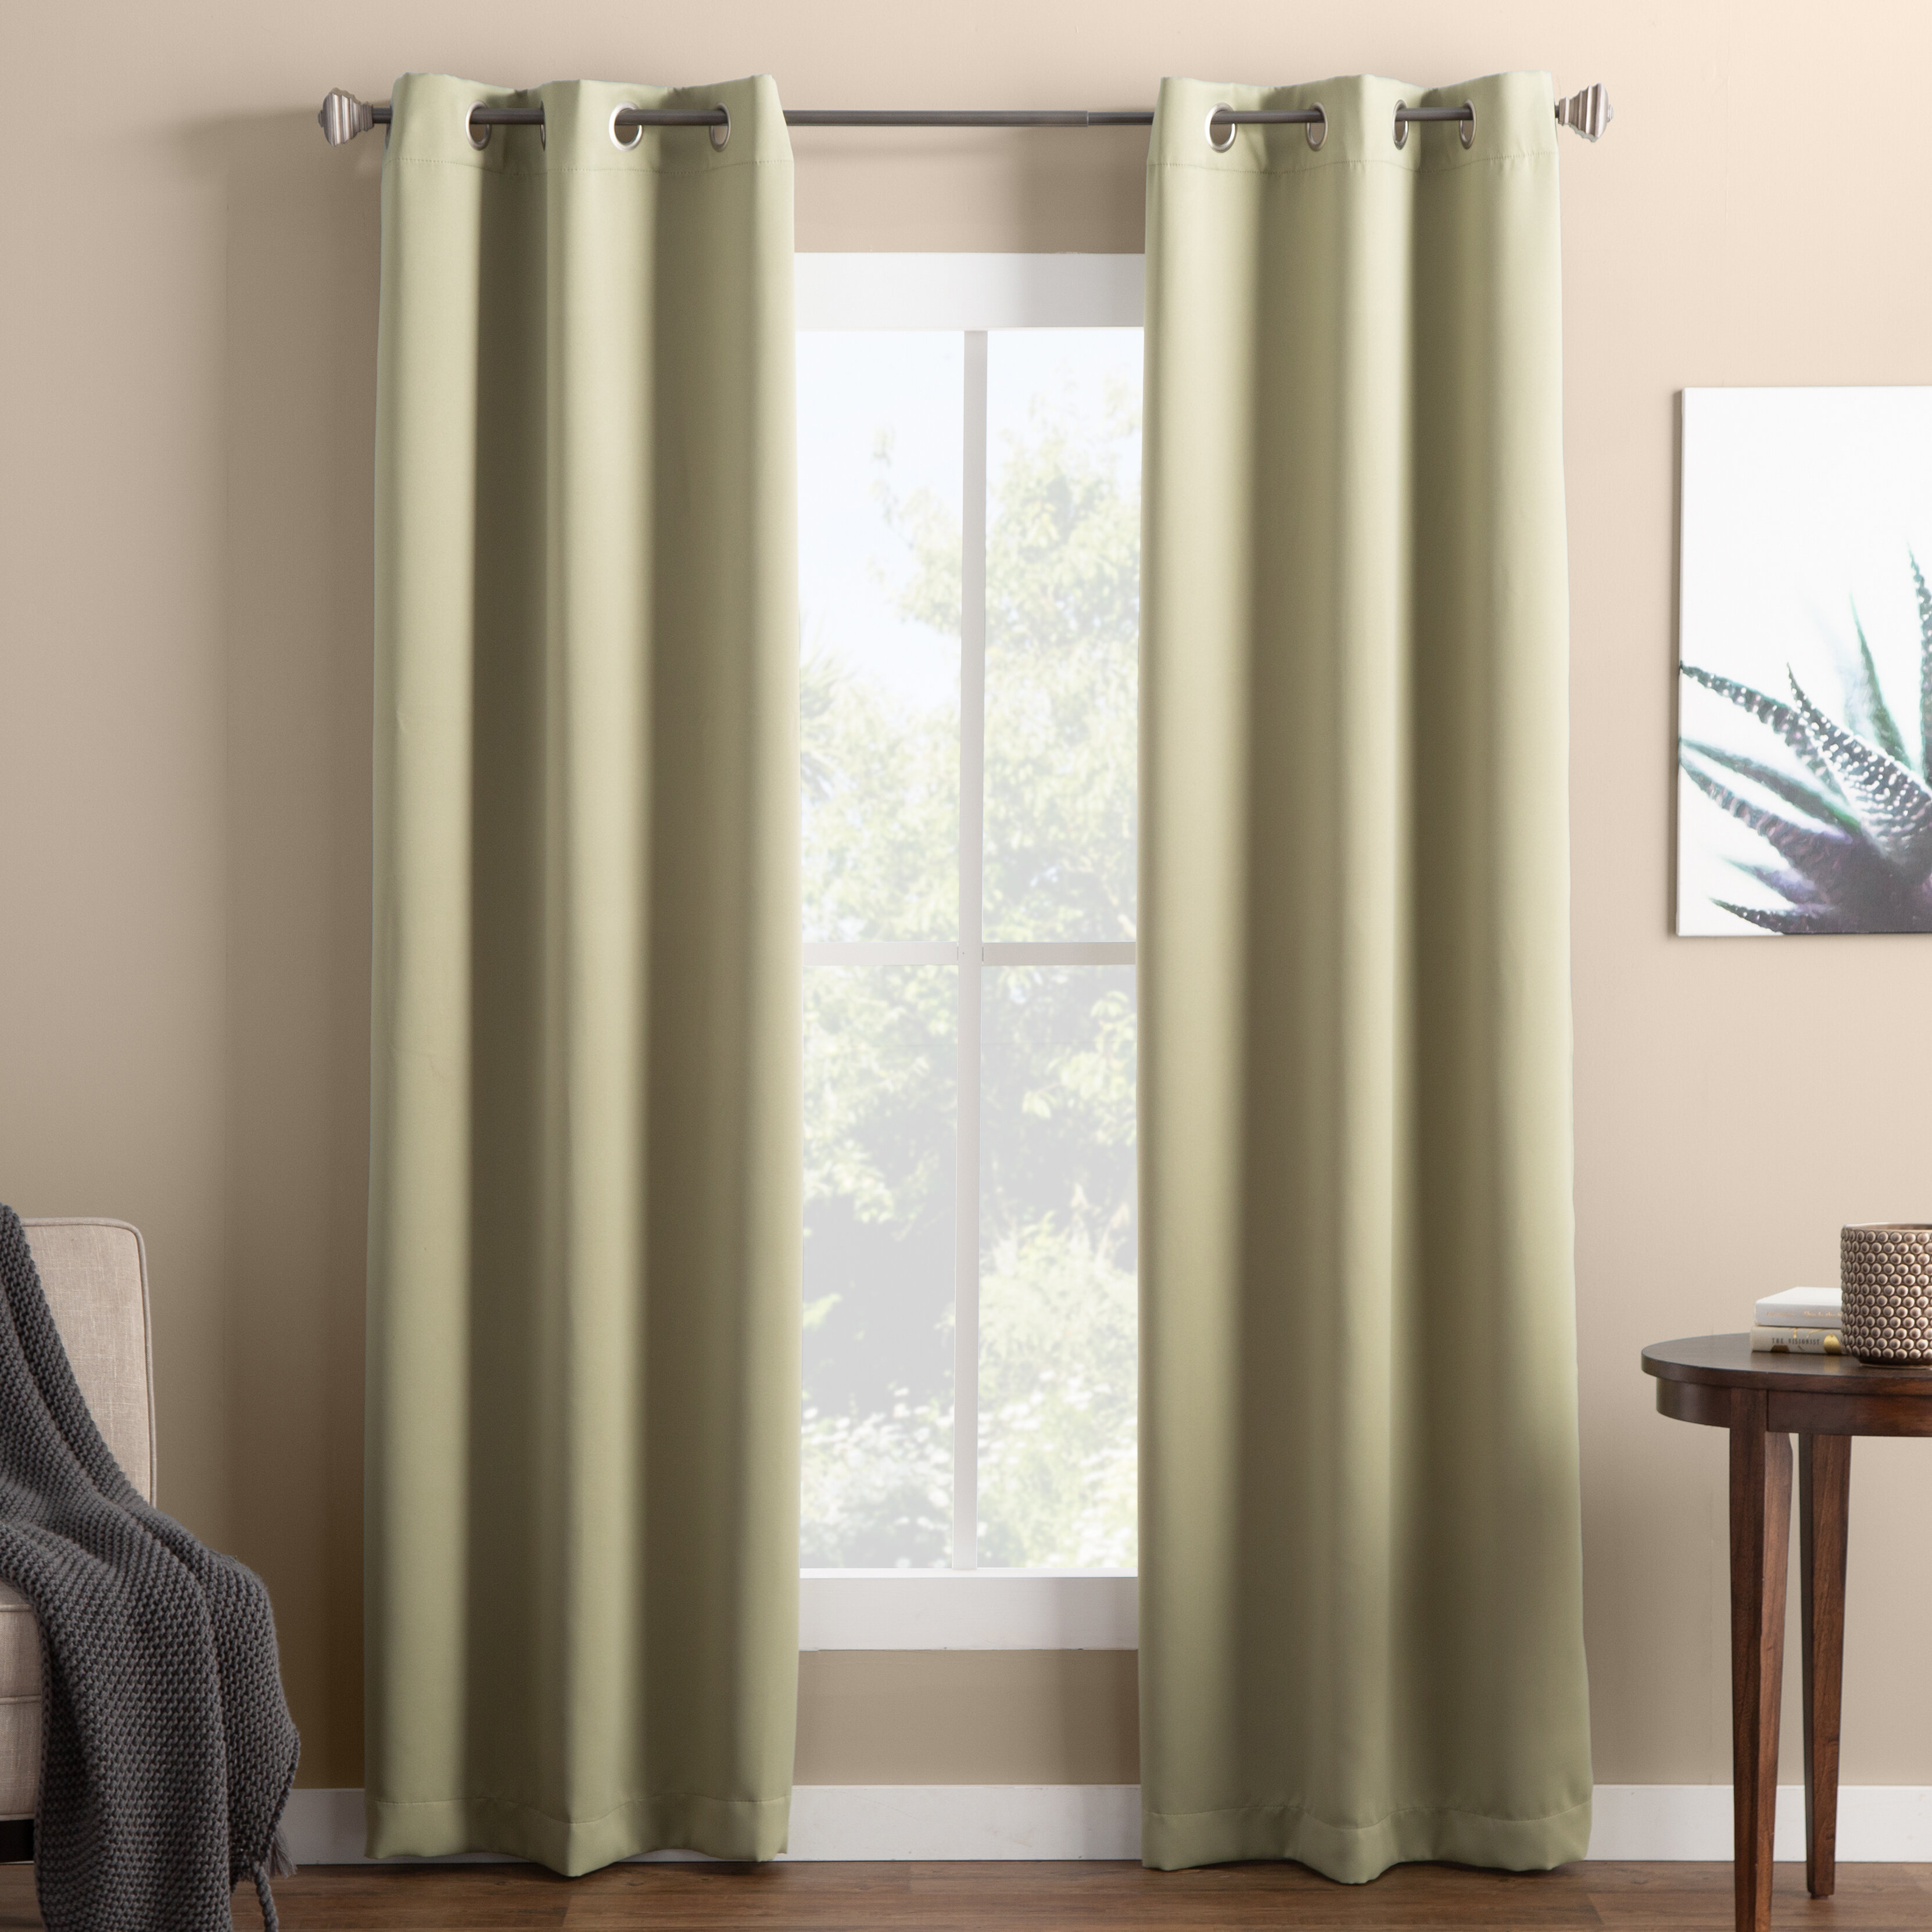 lime green curtain material